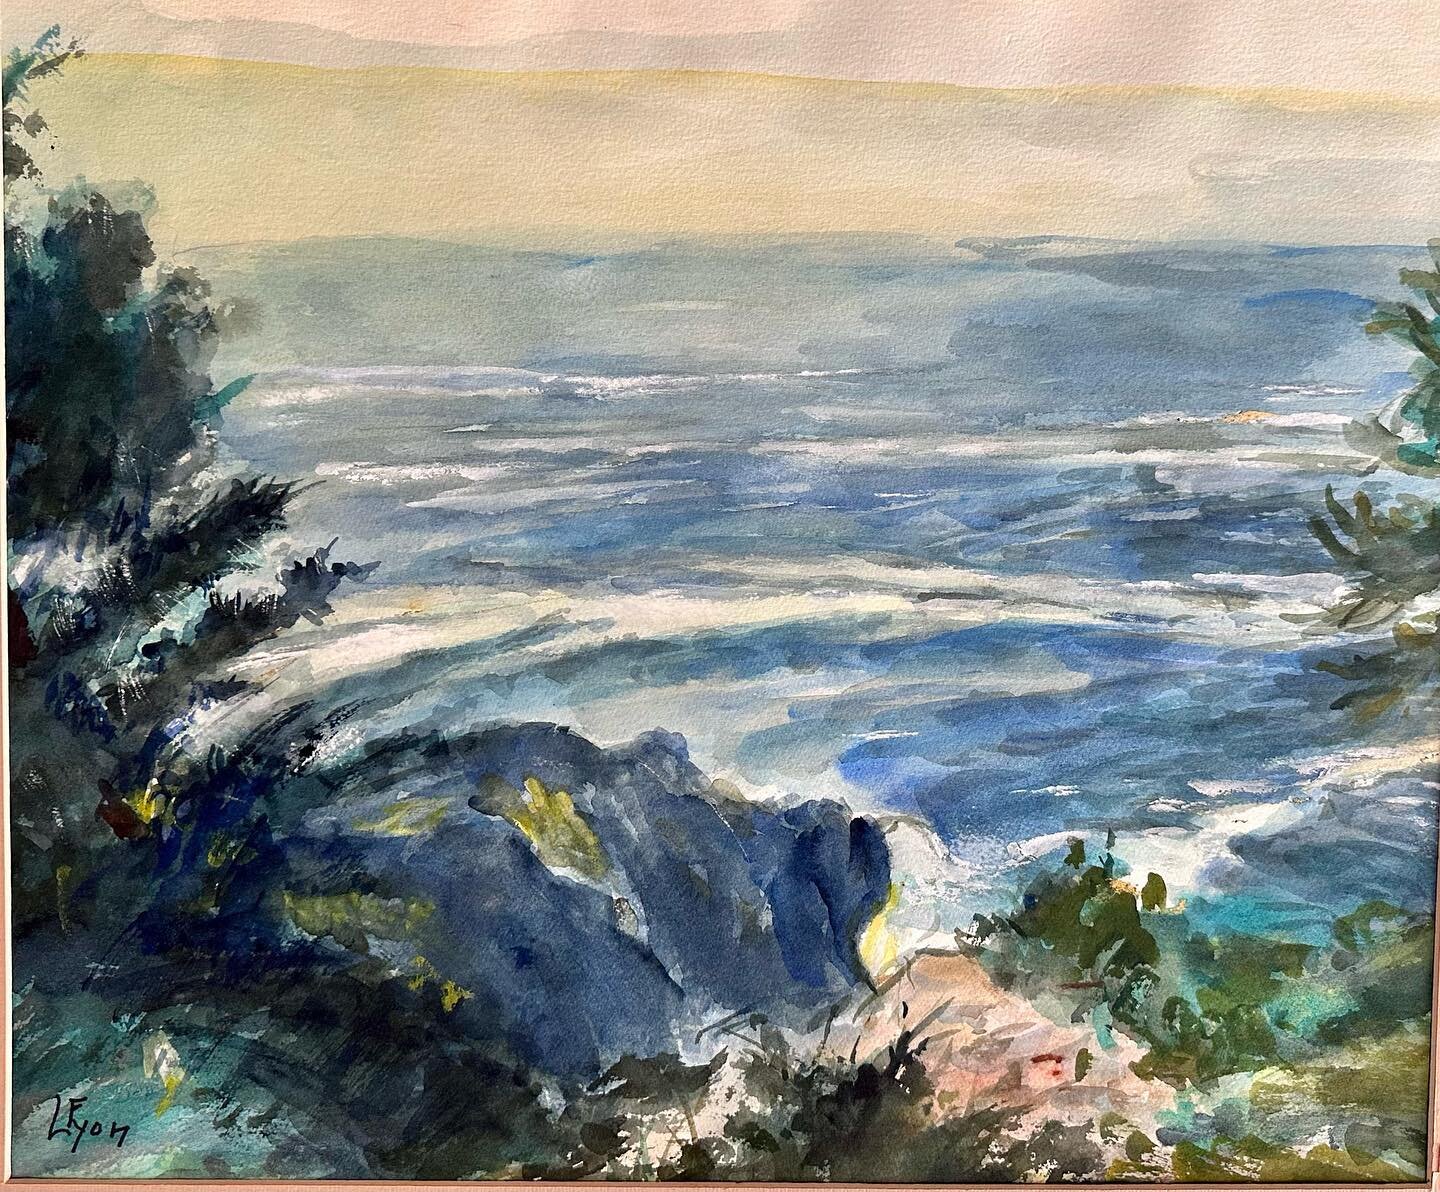 Maine
Signed:  Florence Lyon
Original Watercolor 
Circa 1970
24&rdquo;w x 21&rdquo;h
no frame
$250 plus tax and shipping
Inquiries to email in bio